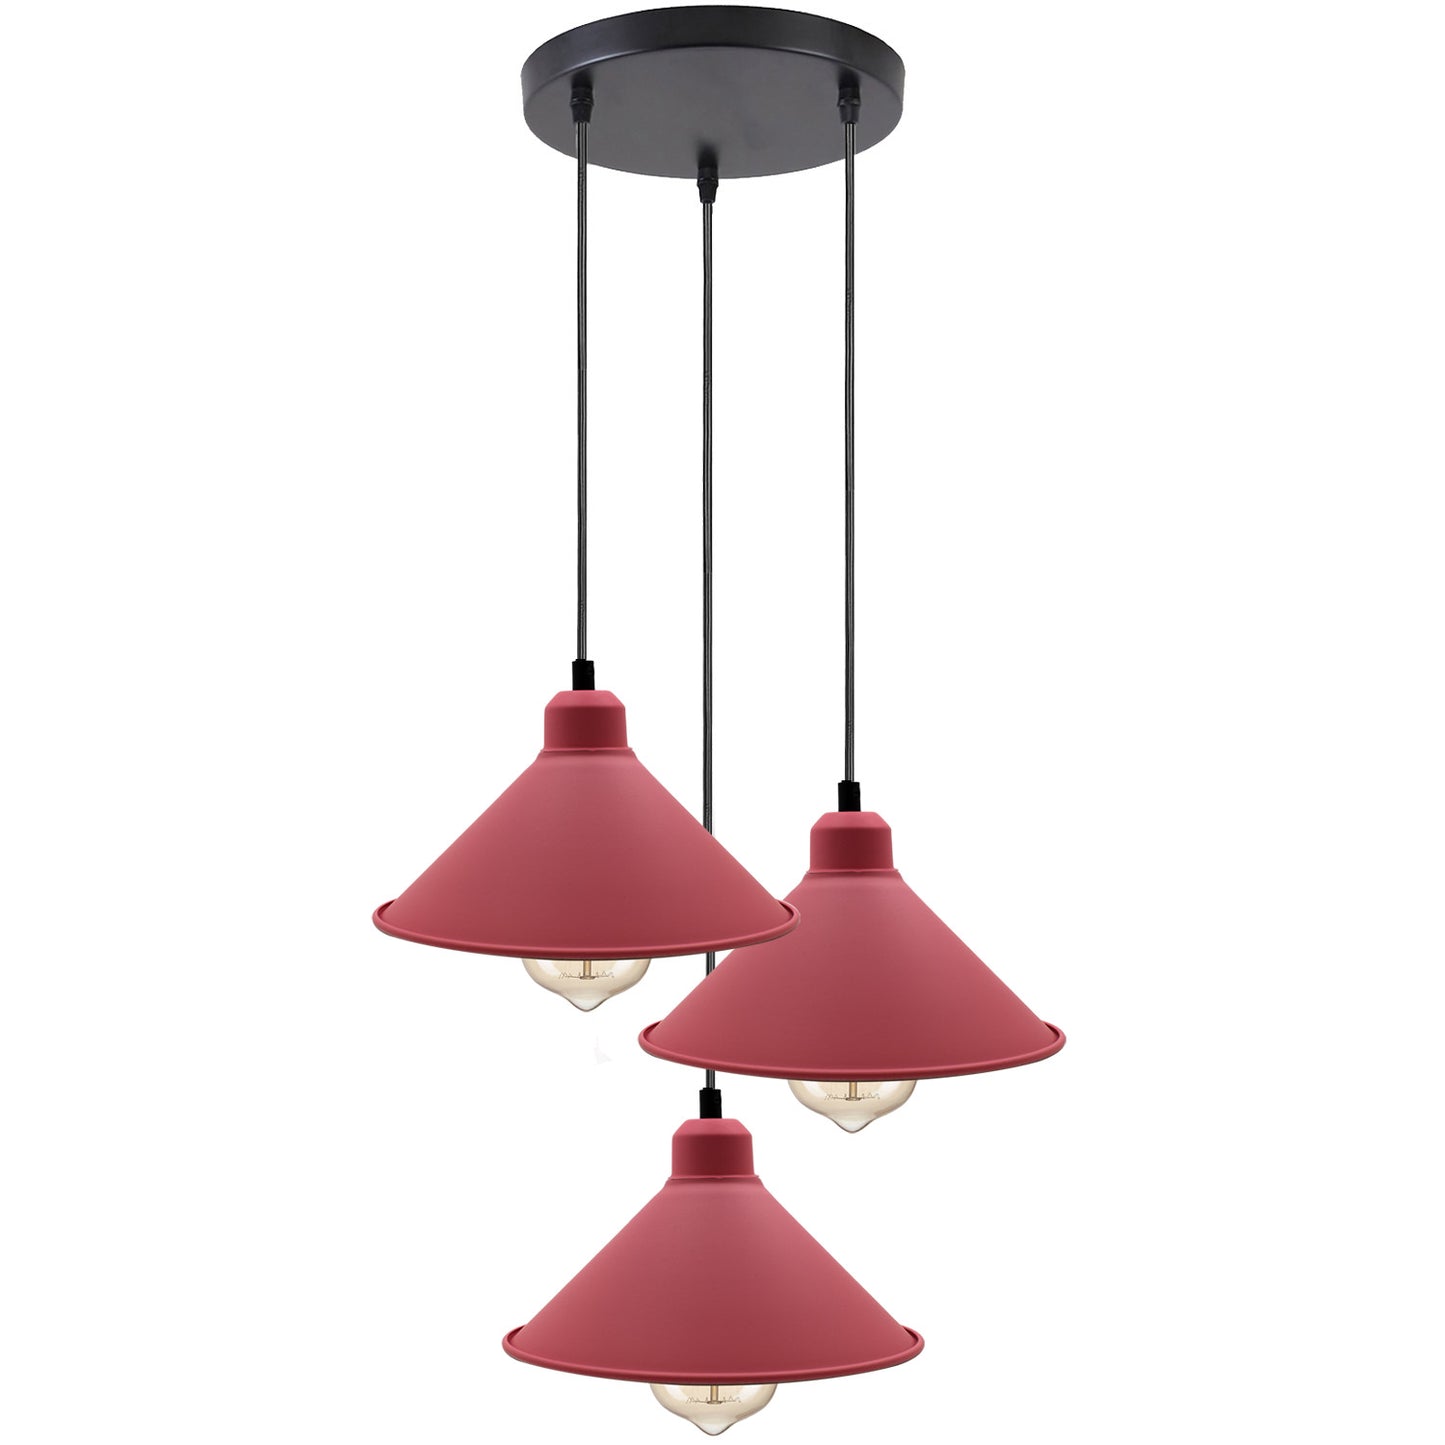 Retro Industrial Pink Cone Shade Cord Ceiling Pendant light